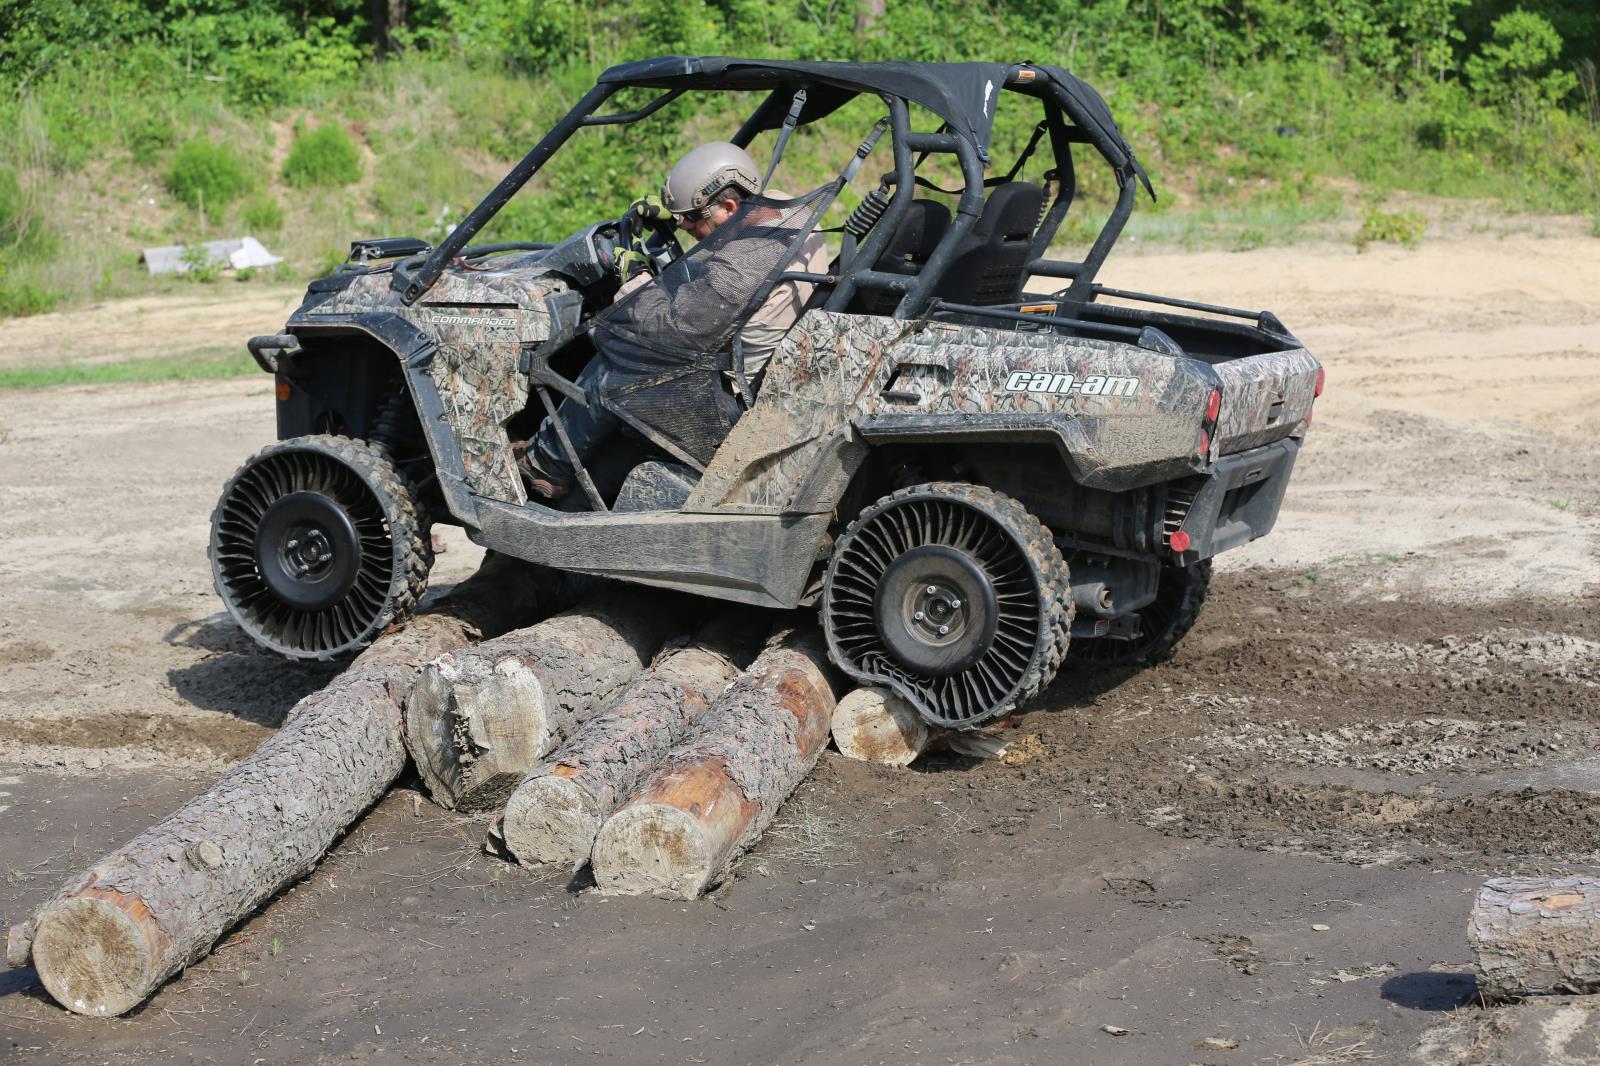 A UTV with airless tires climbing over a pile of logs.